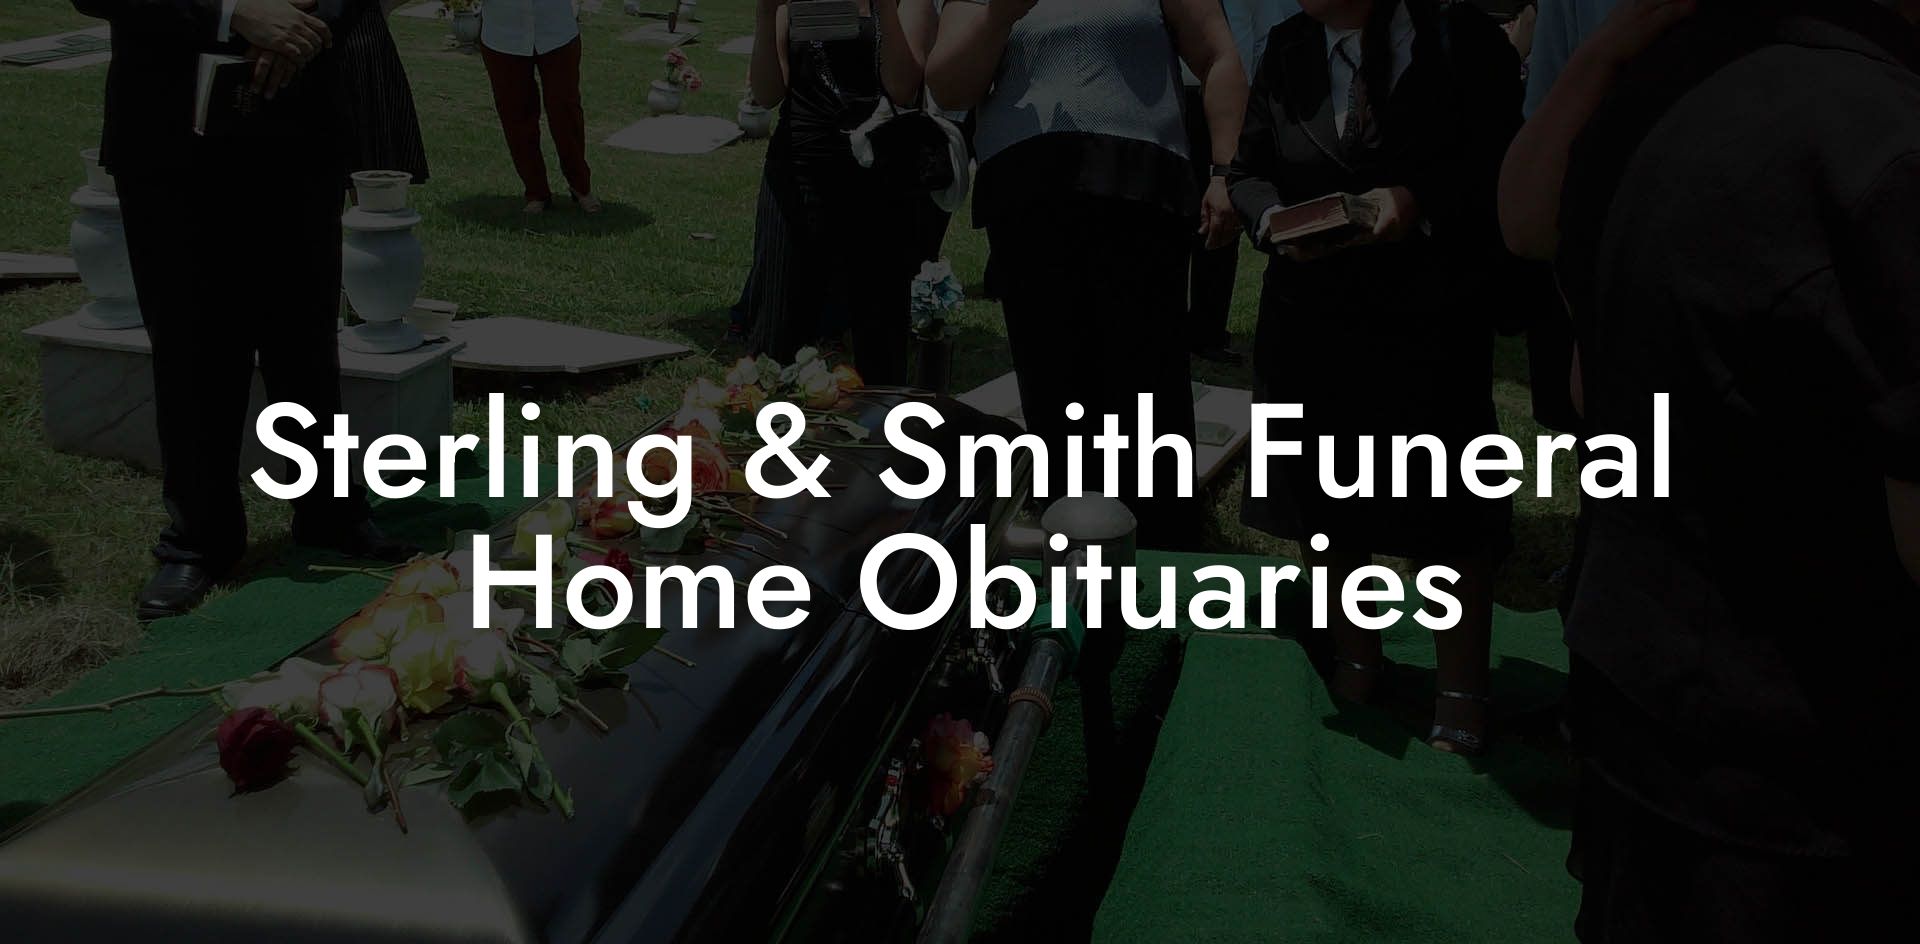 Sterling & Smith Funeral Home Obituaries